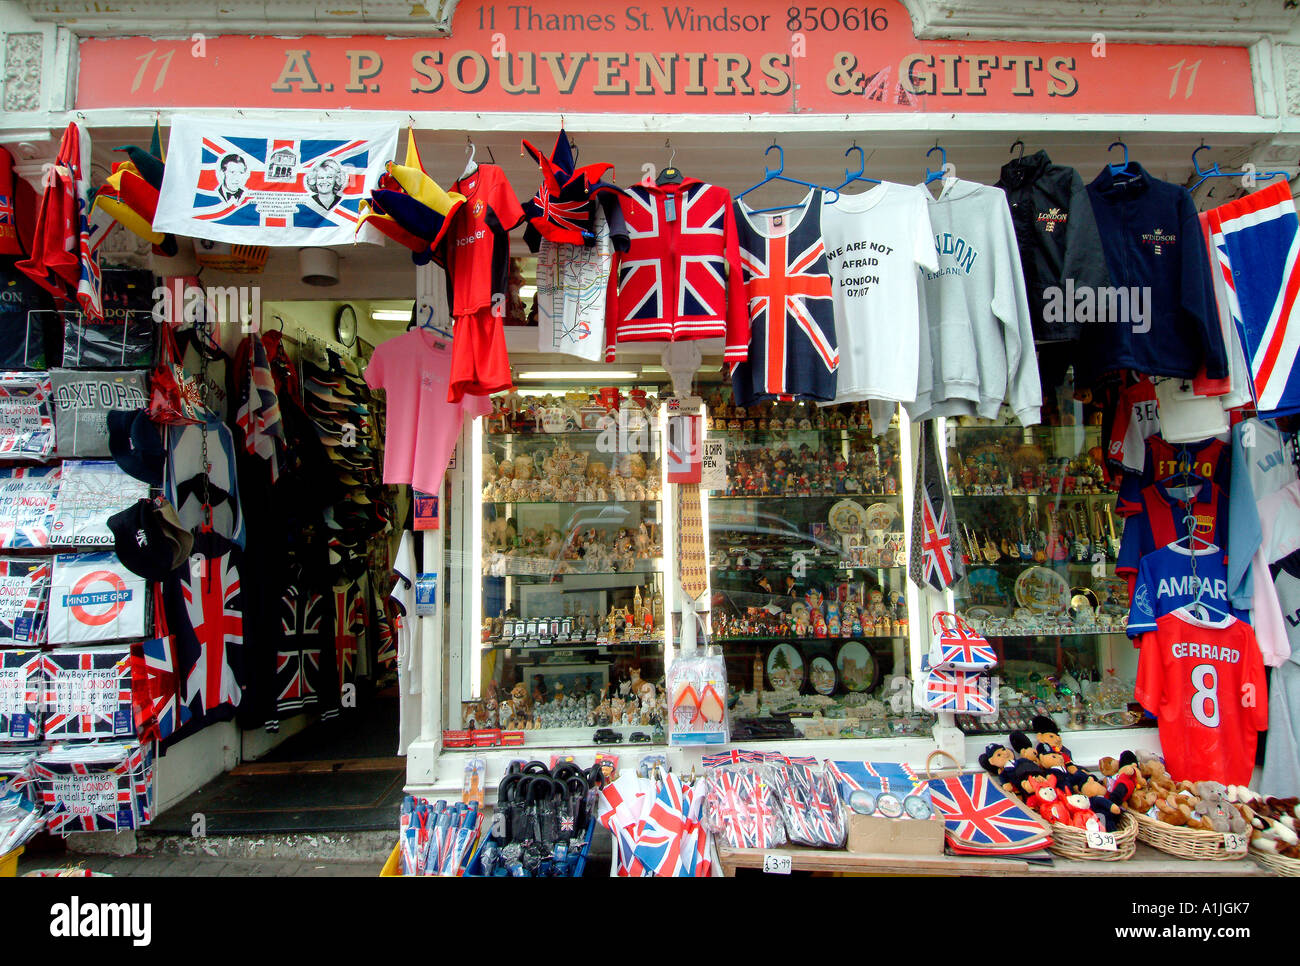 Souvenirs and Gift store Windsor England Stock Photo